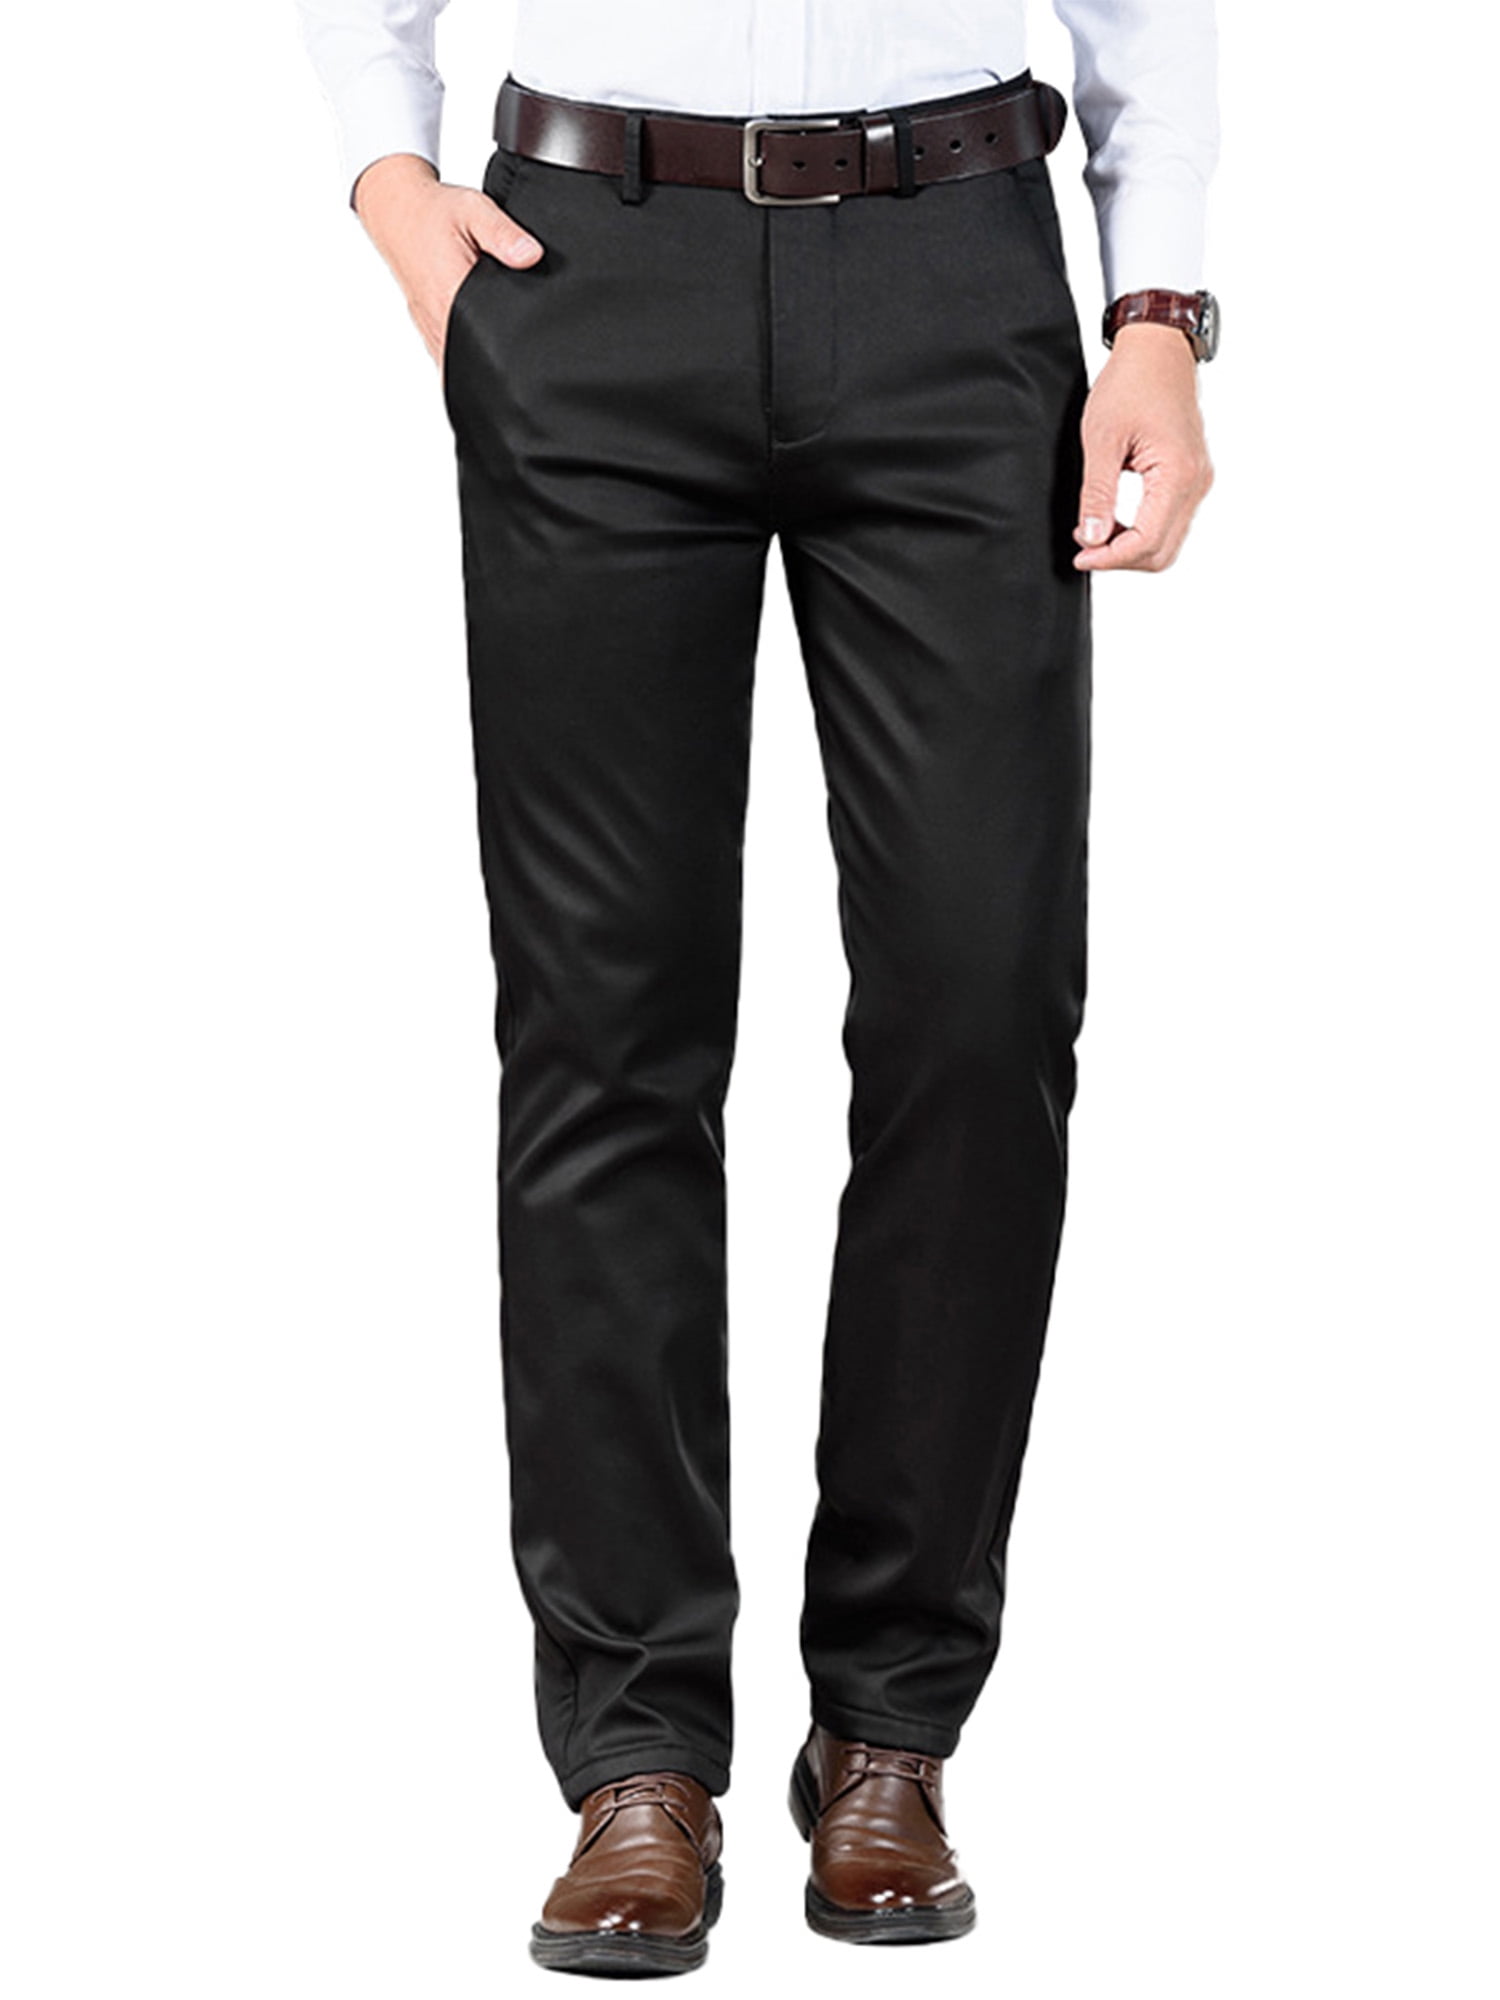 Mens Formal Suit Trousers Straight Leg Office Pants Stretch Slim Fit Work Home Smart Dress Pants